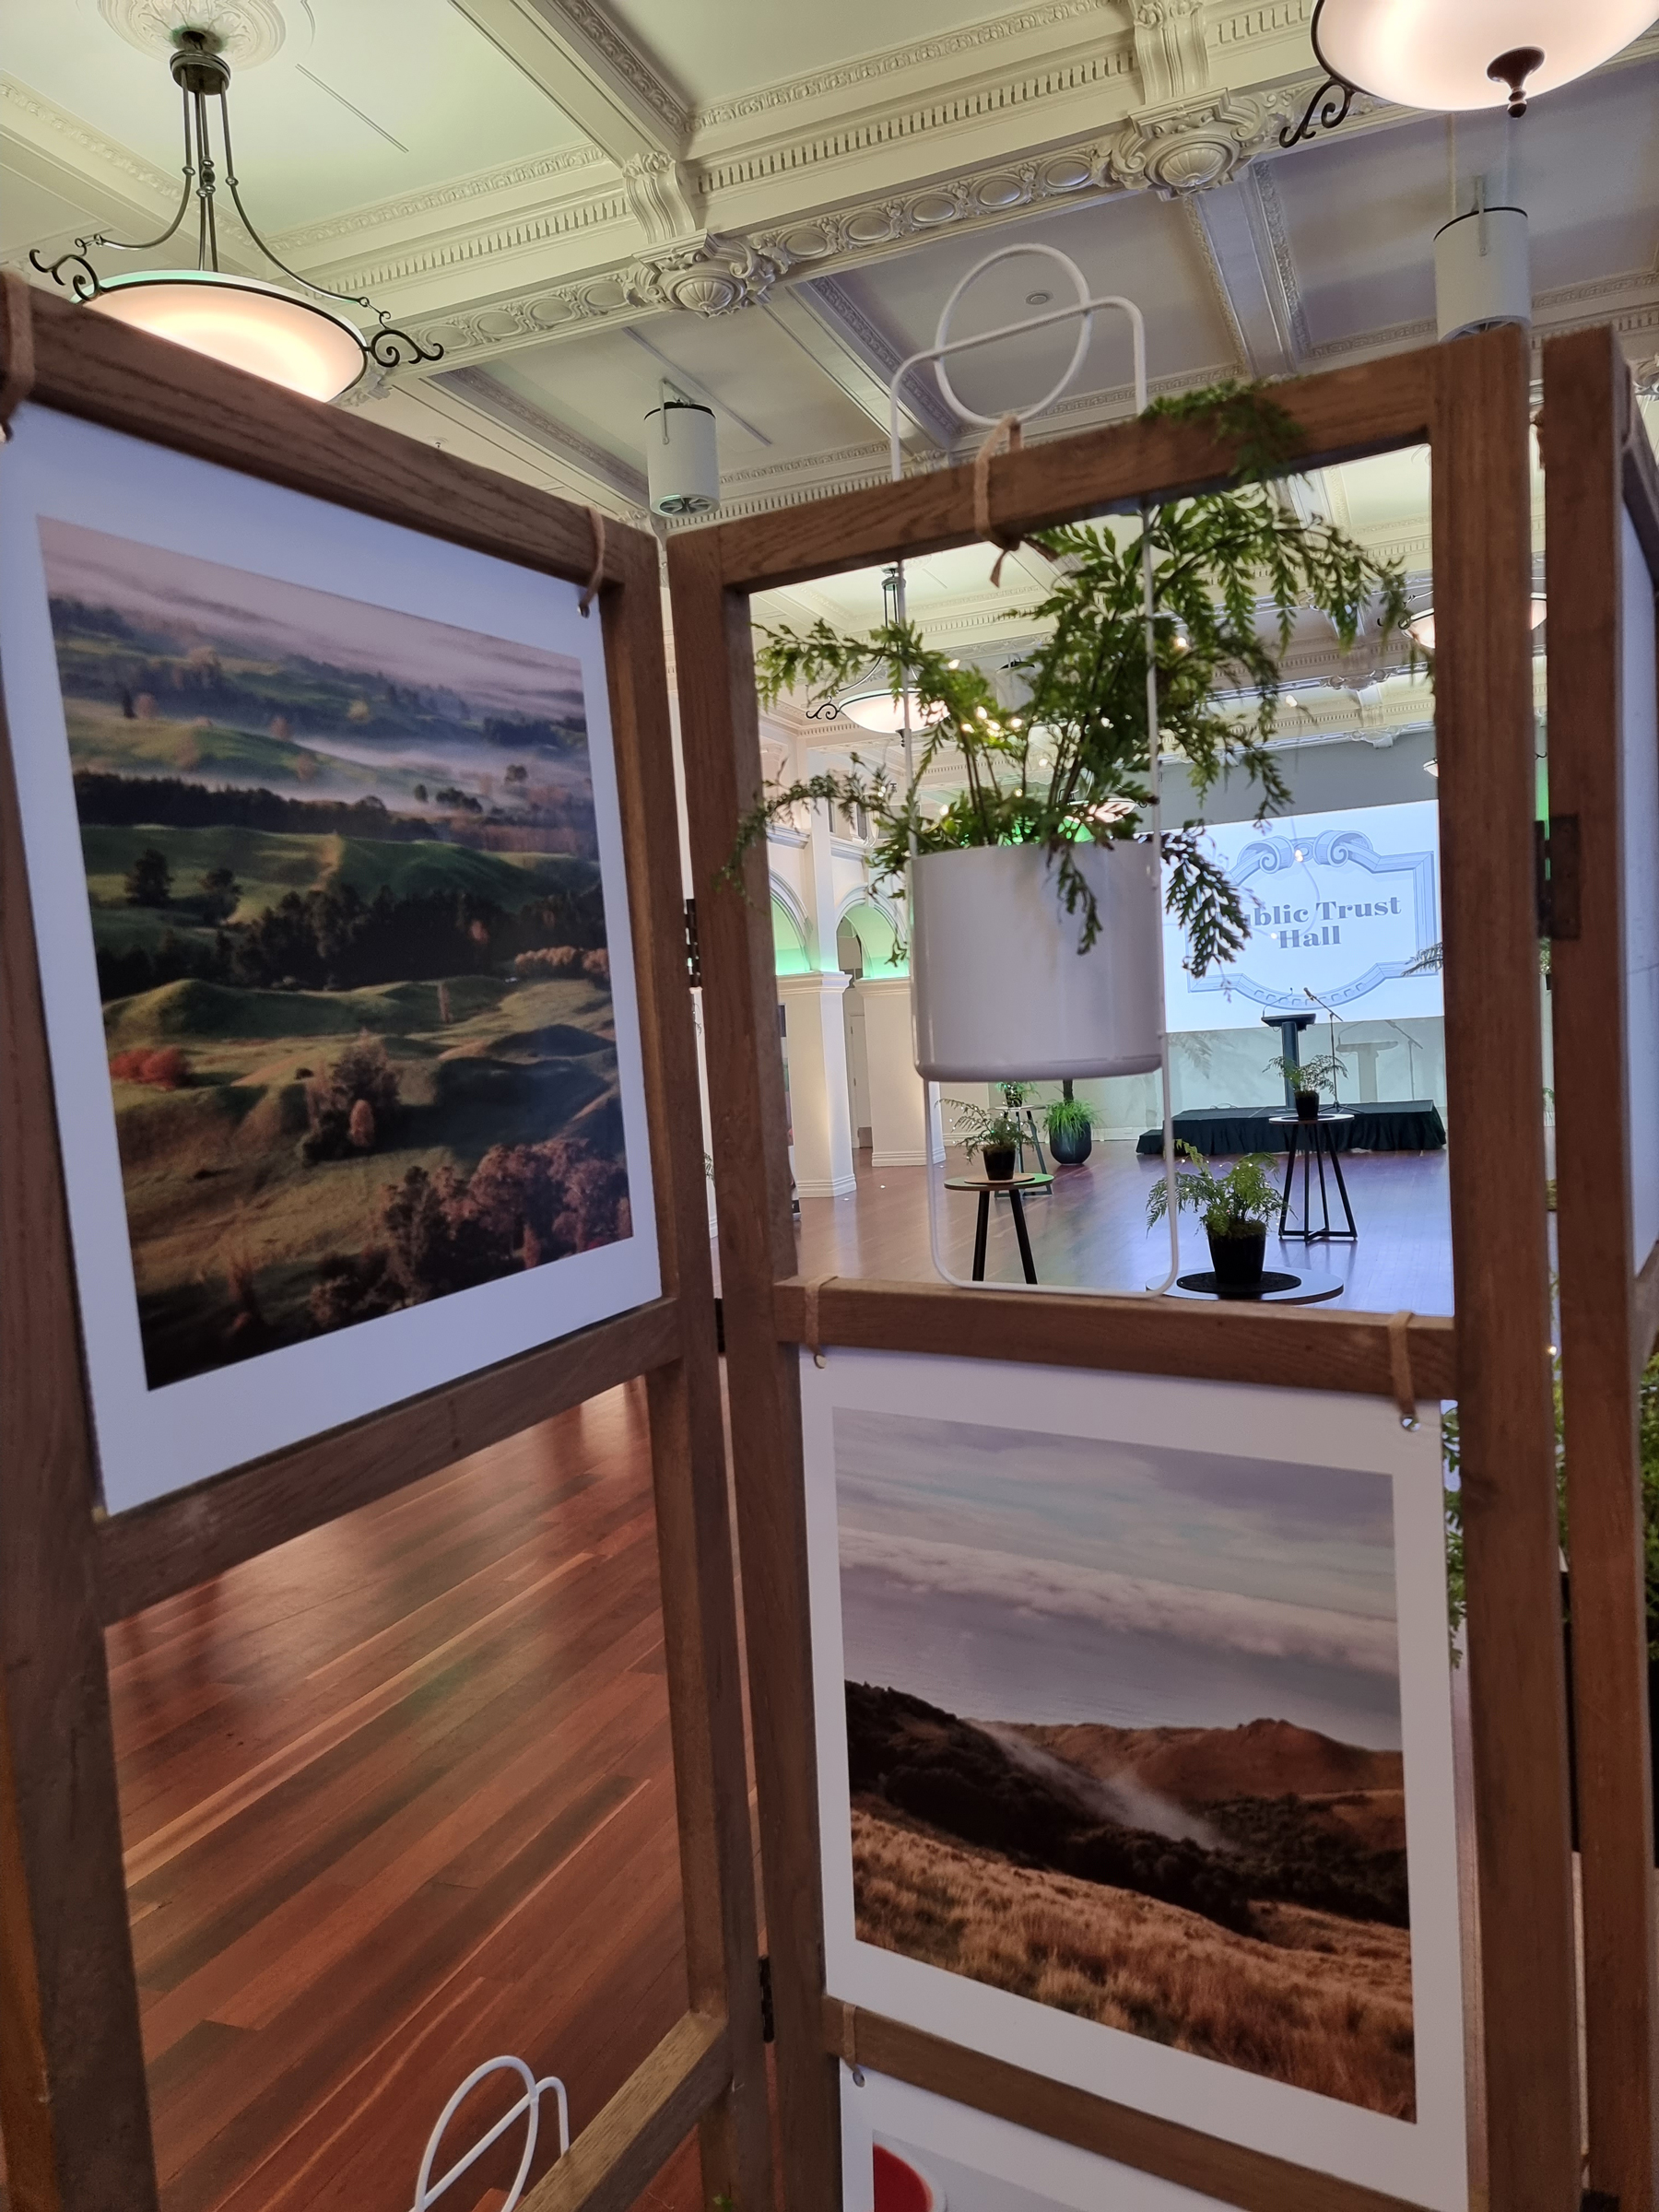 Product Launches ... Silver Fern Farms Carbon Zero Product Launch 2022